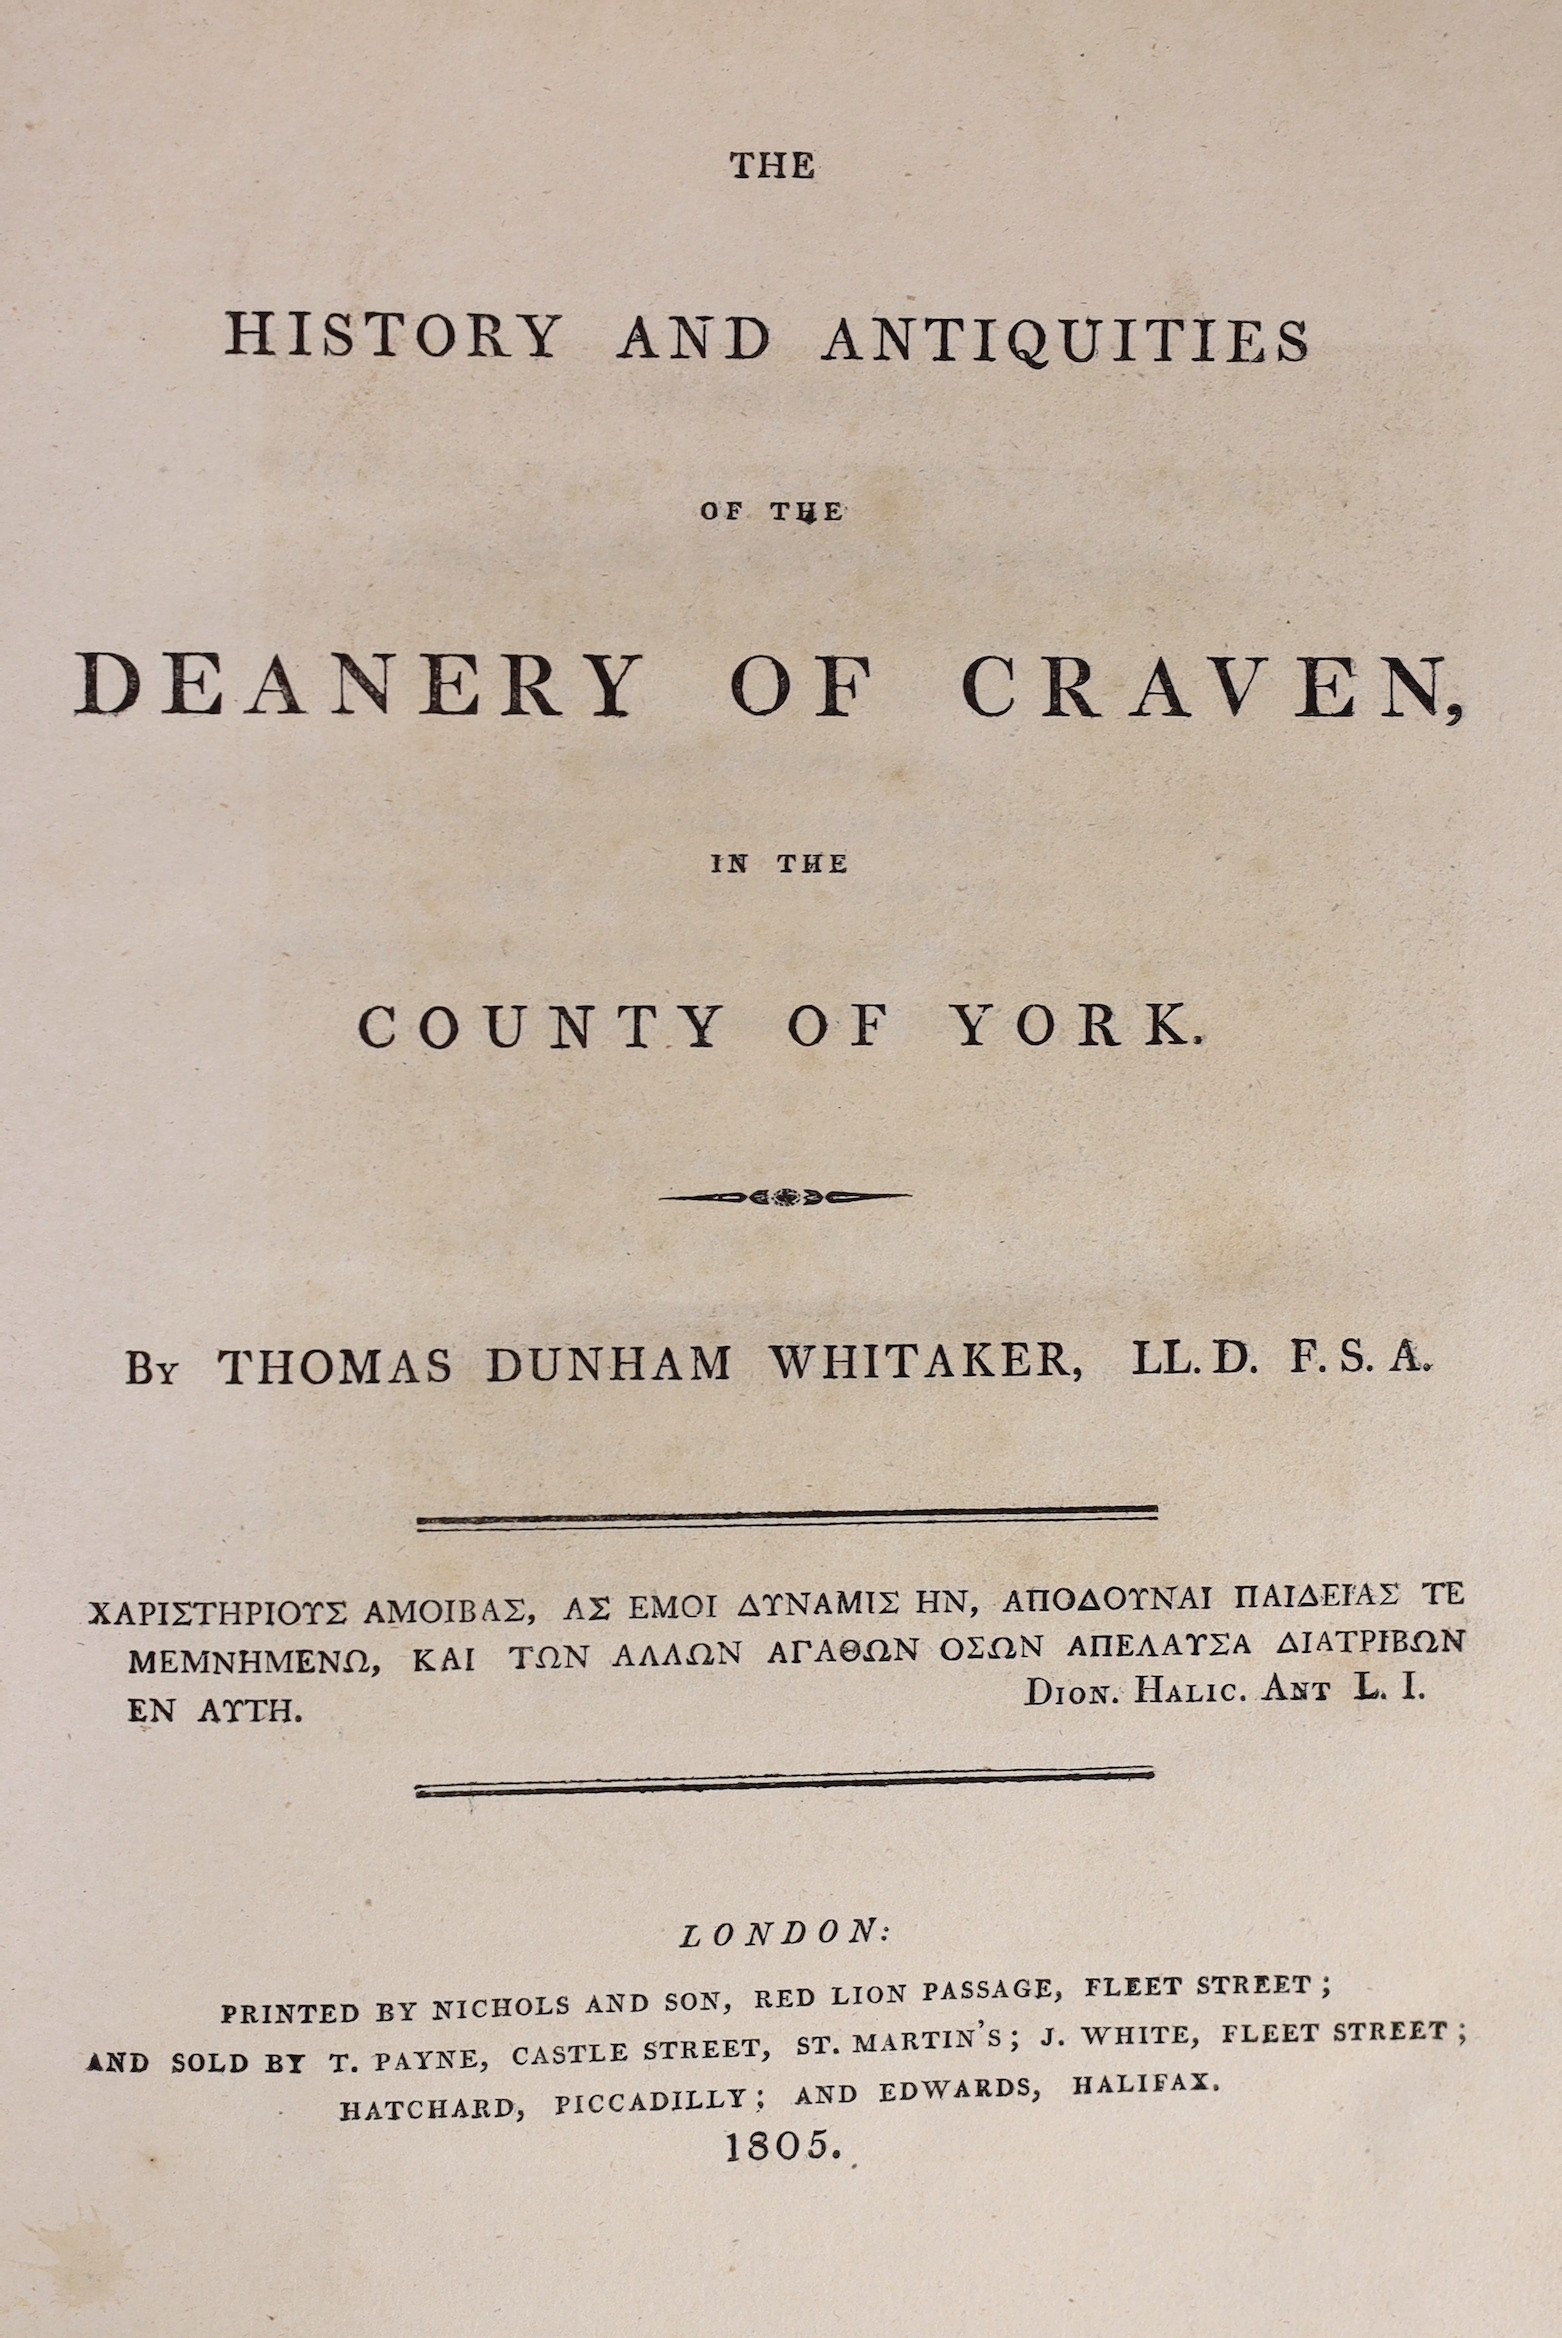 CRAVEN (YORKSHIRE) - Whitaker, Thomas Dunham - The History and Antiquities of the Deanery of Craven in the County of York, 4to, later cloth, with frontis portrait, 35 of 36 plates (lacking Clitheroe Castle [not in Yorksh